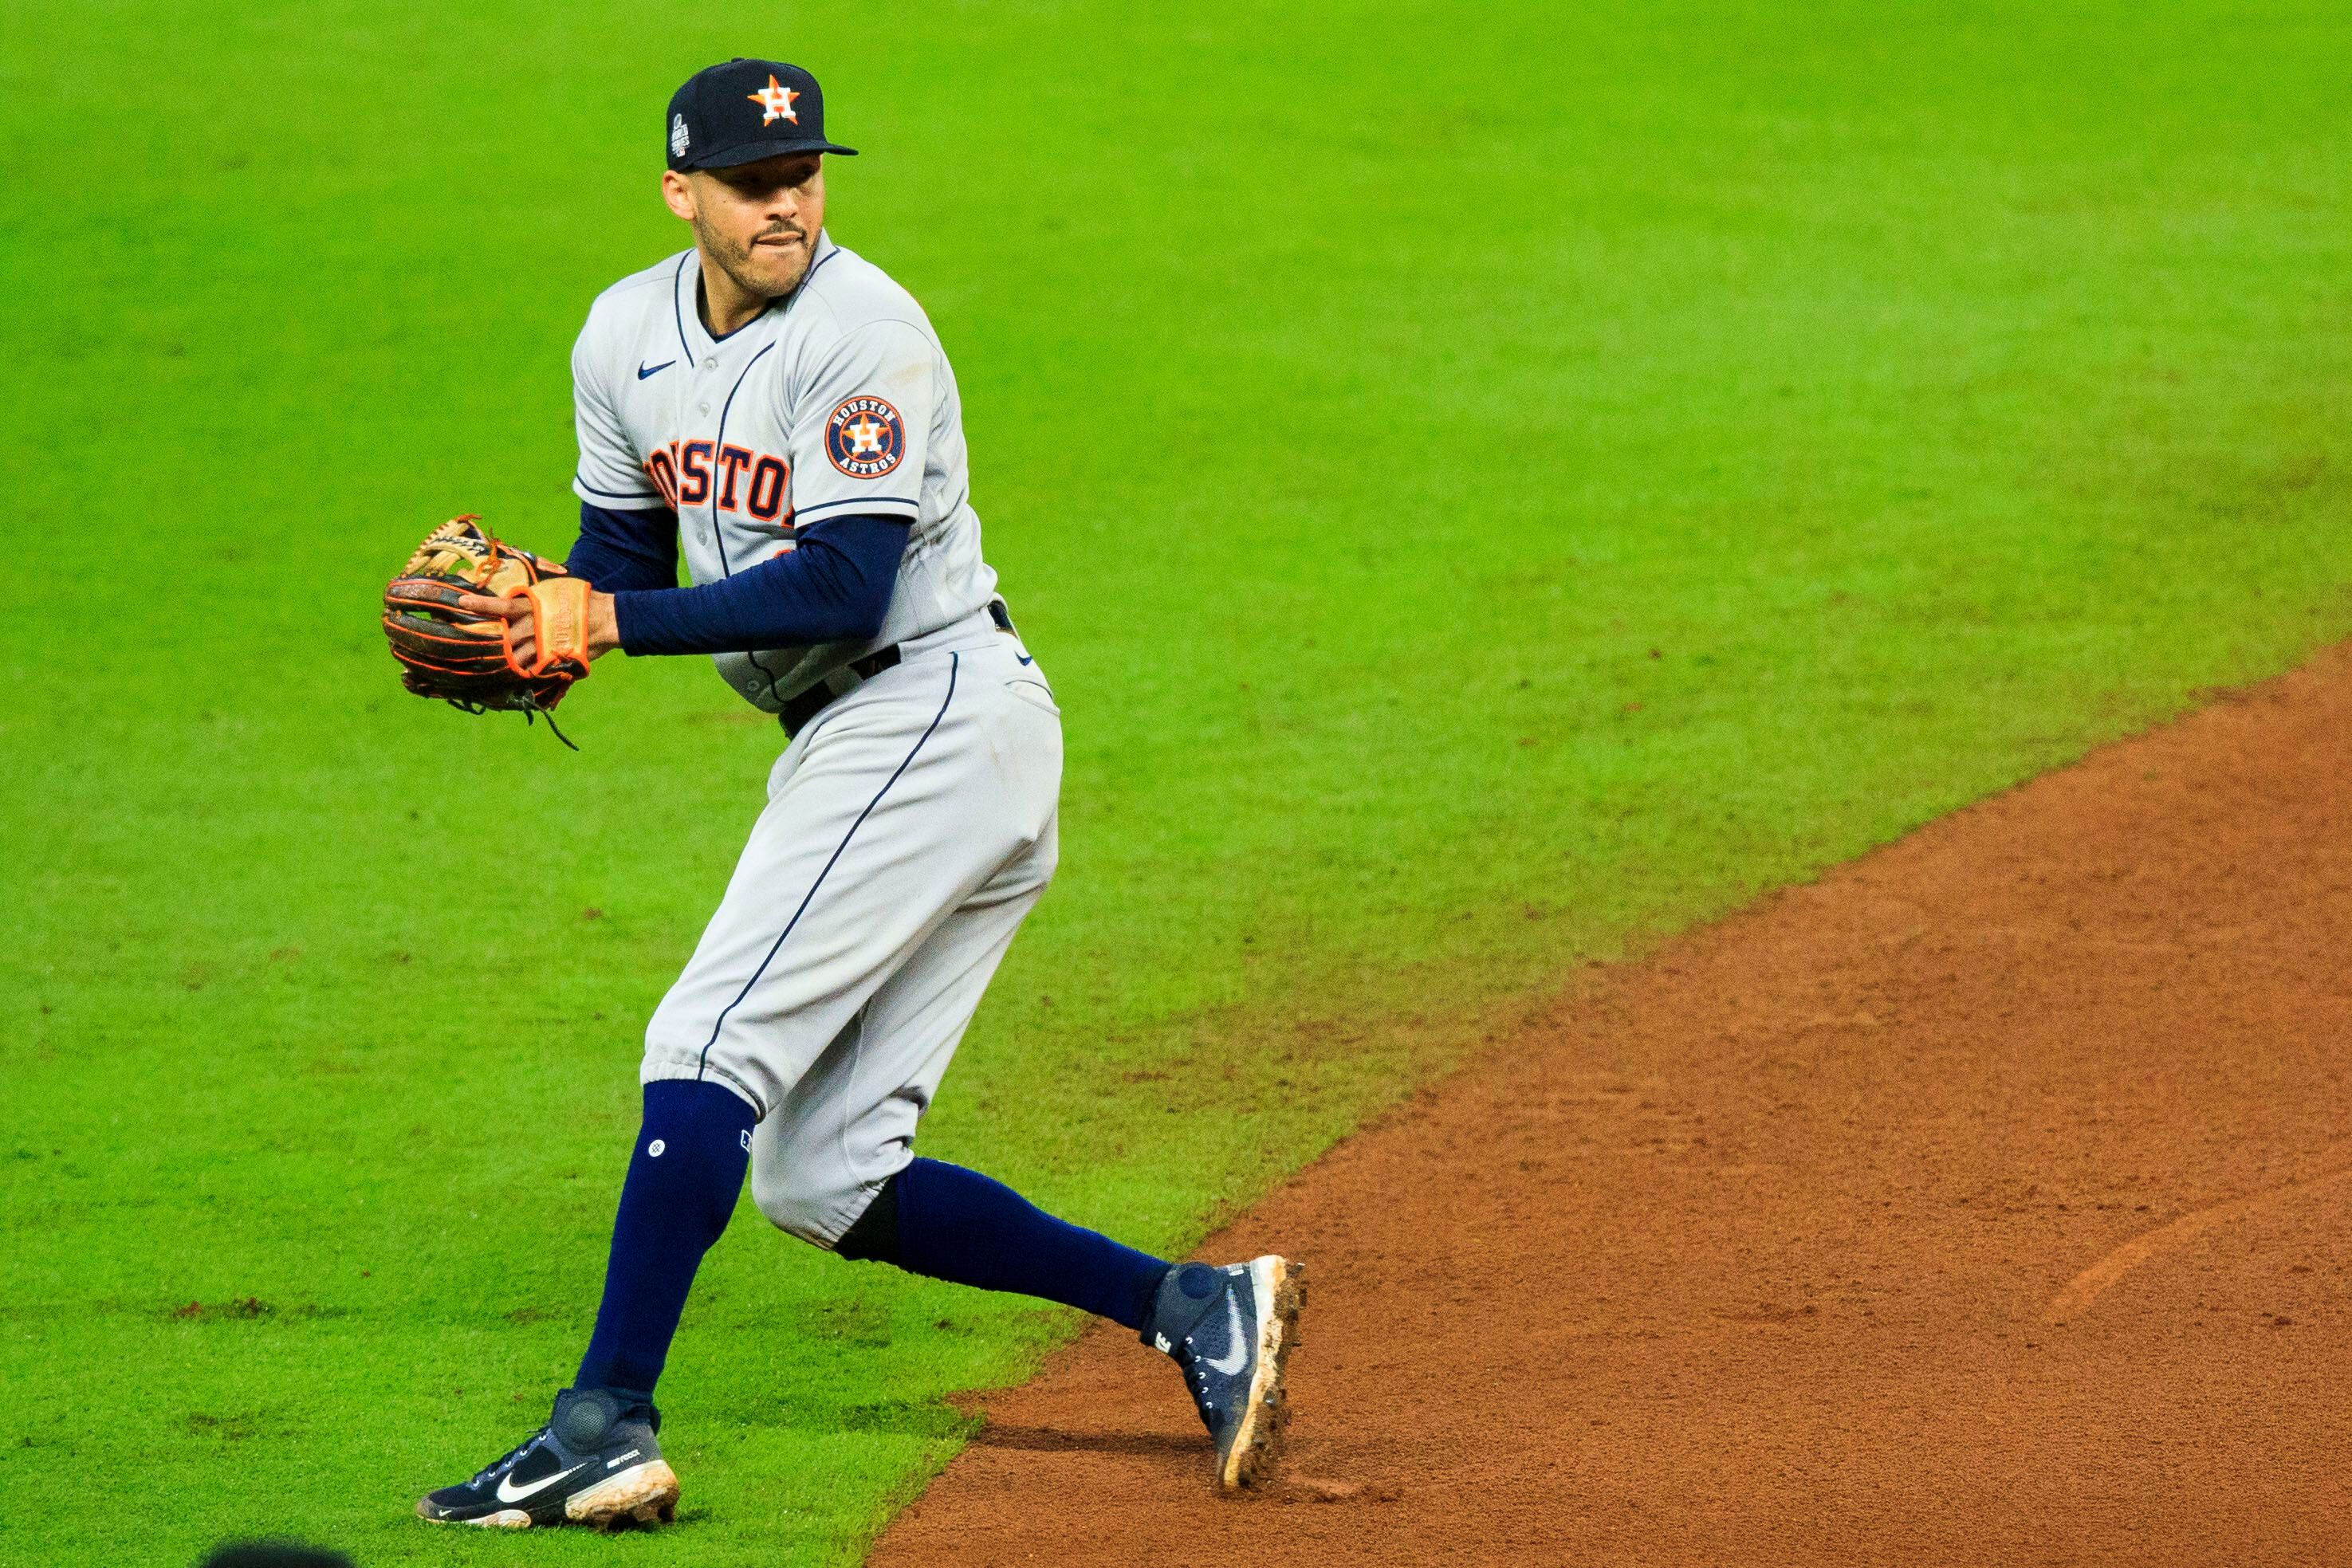 Carlos Correa's deadline day converges with opening day for Astros